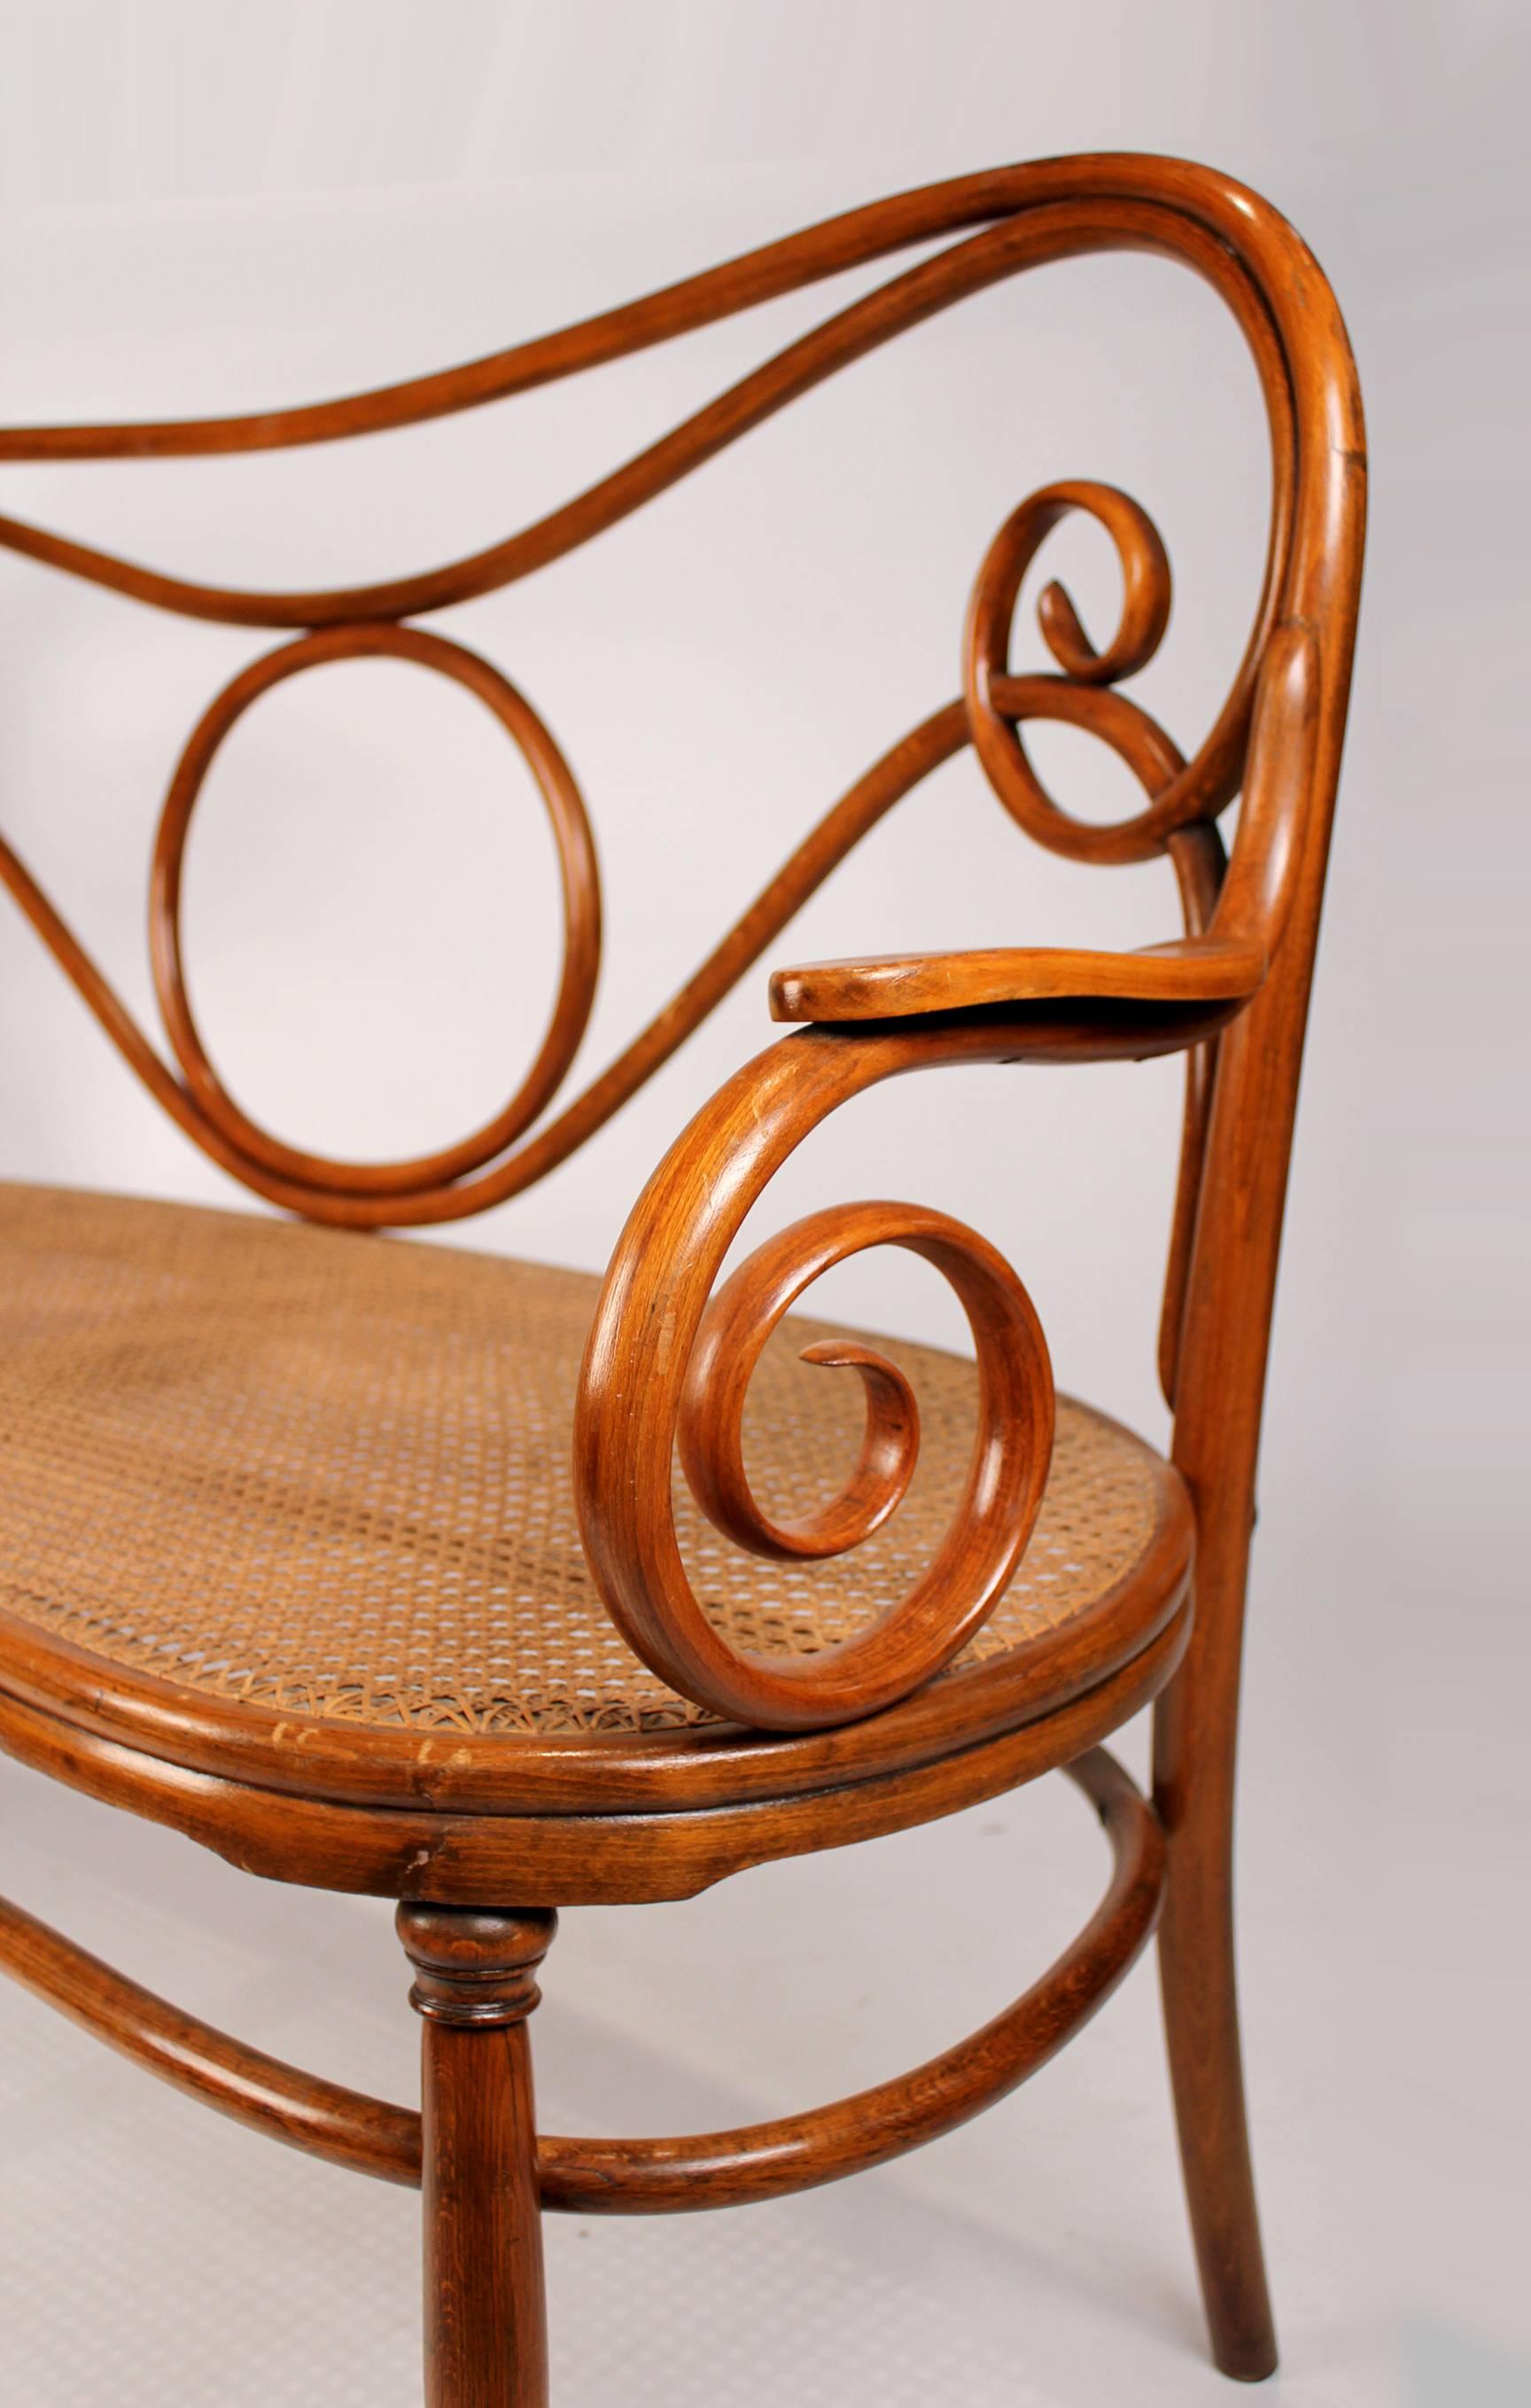 19th Century Gebruder Thonet Viennese Secessionist Bentwood Settee Designed by August Thonet